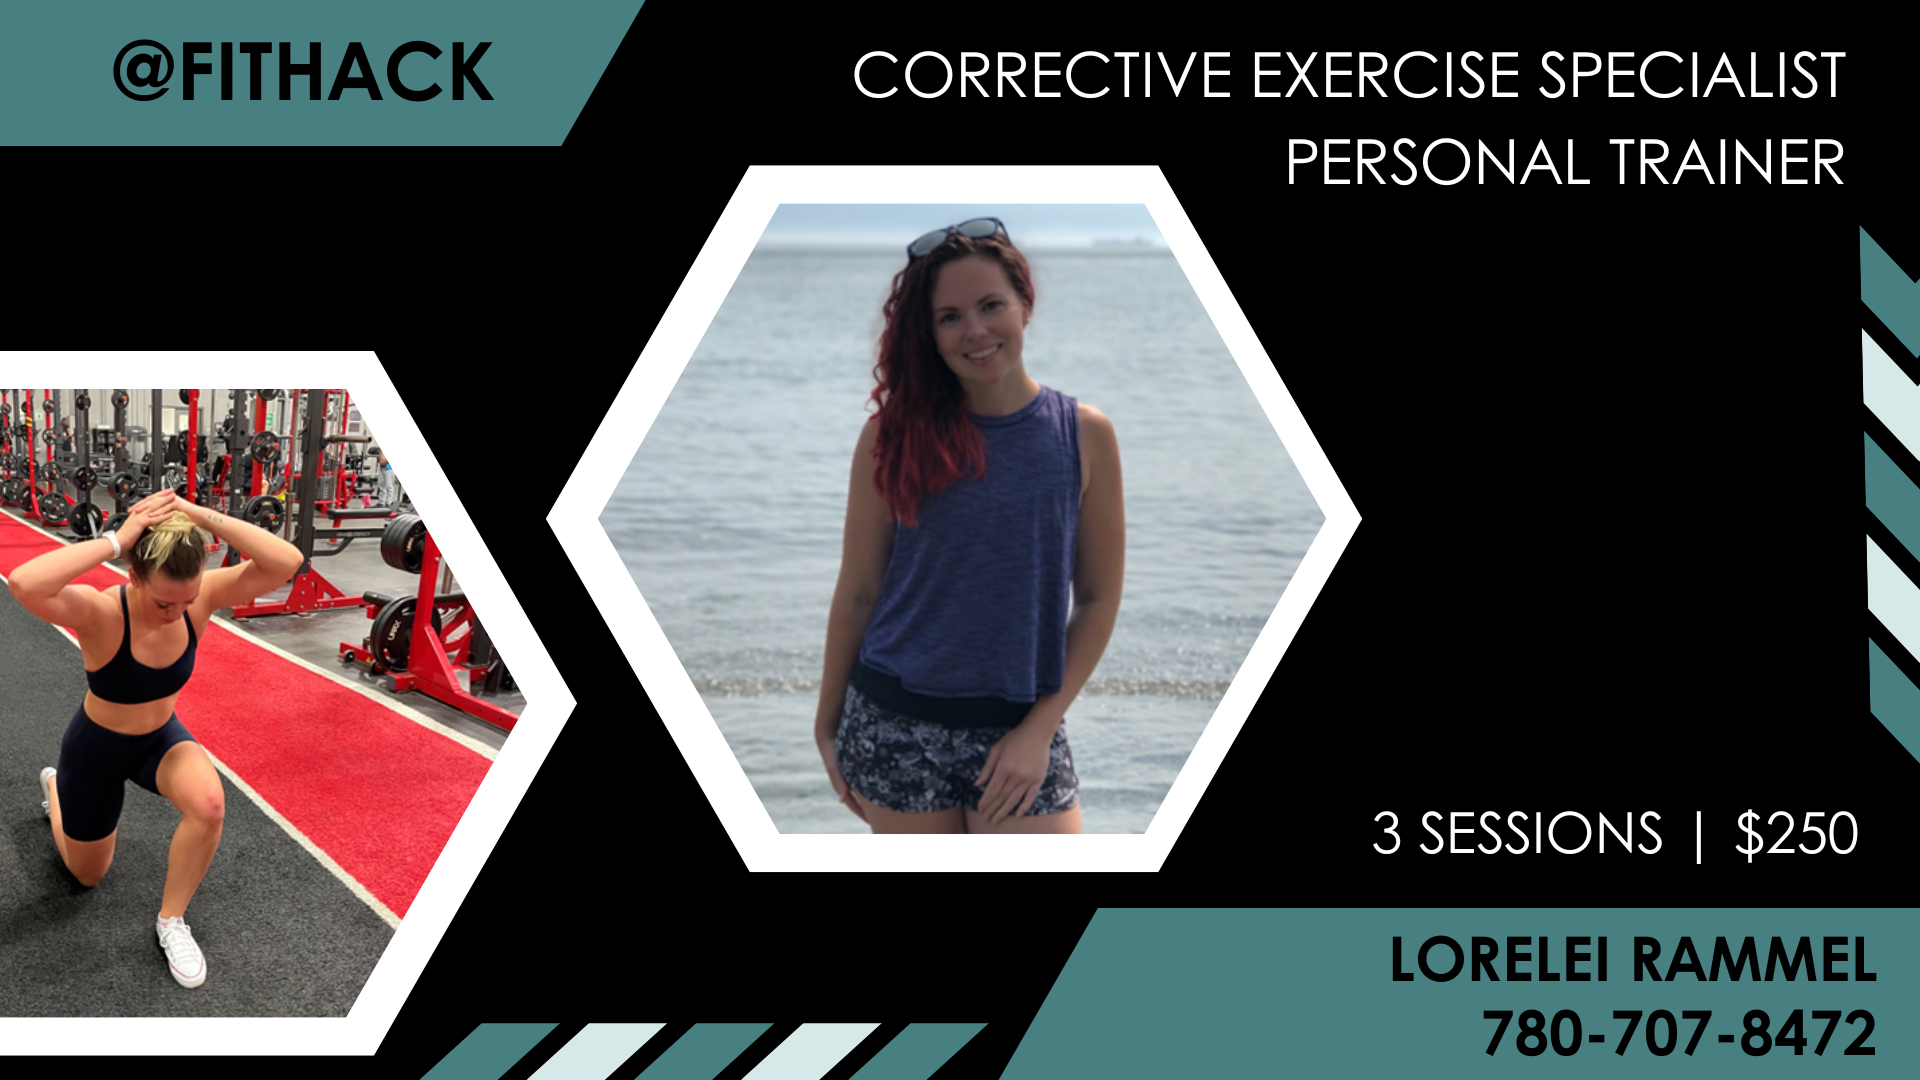 FitHack Lorelei Rammel Corrective Exercise Specialist Personal Trainer